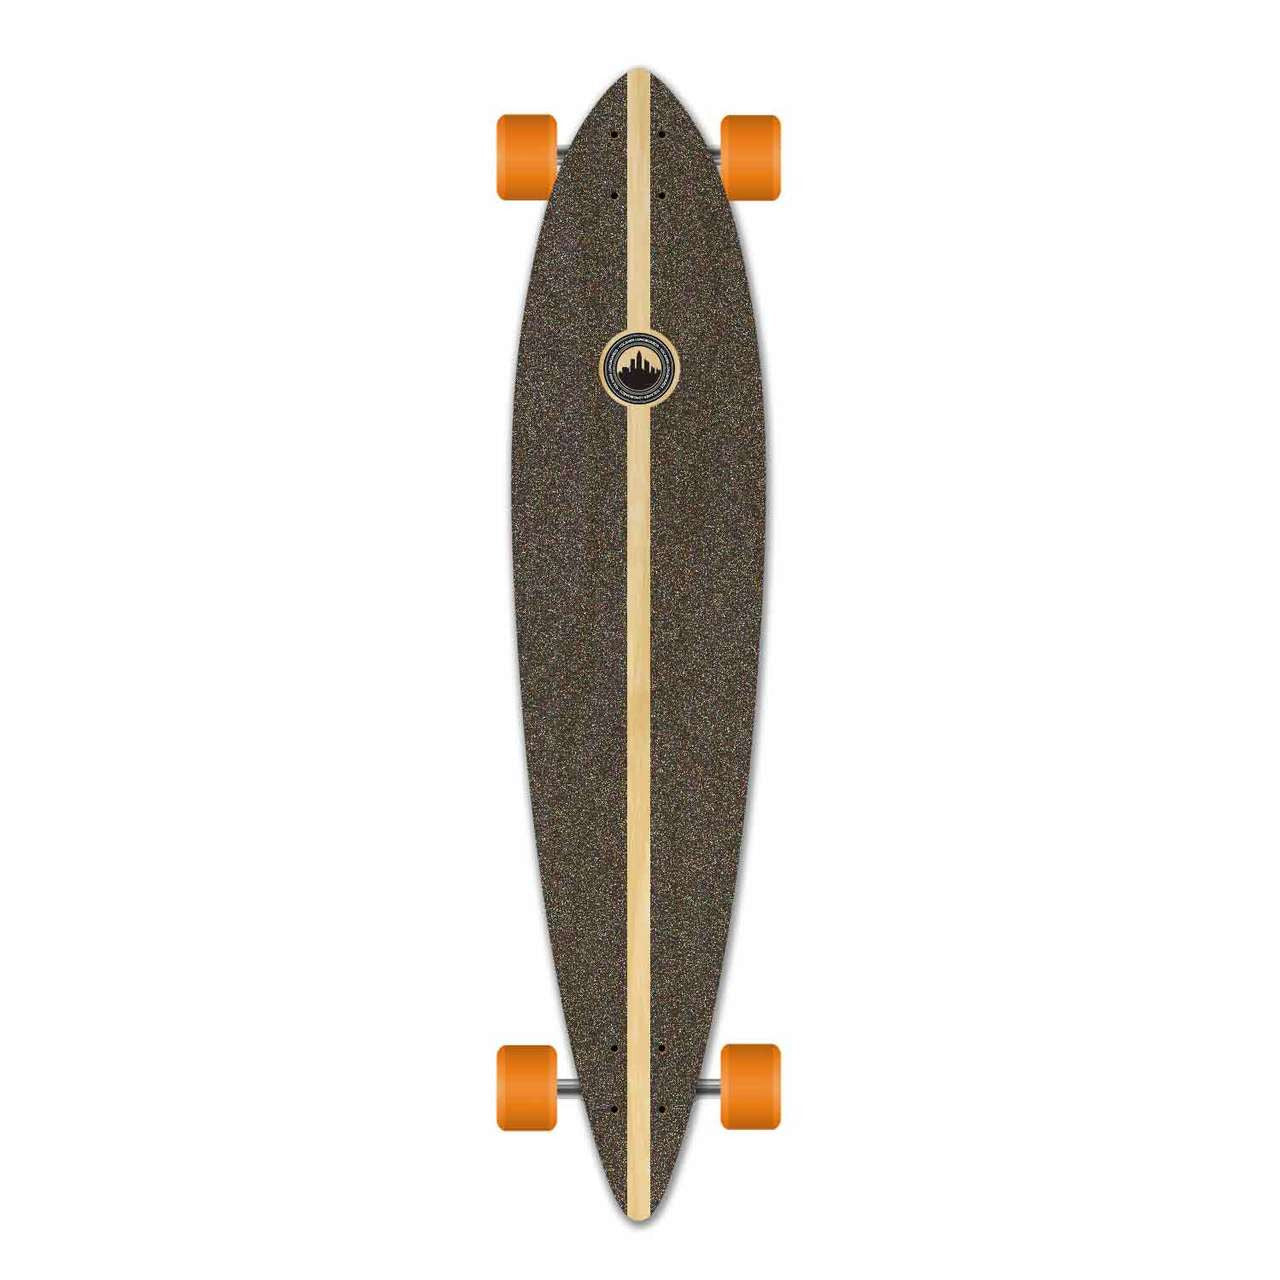 Yocaher Pintail Longboard Complete - San Francisco